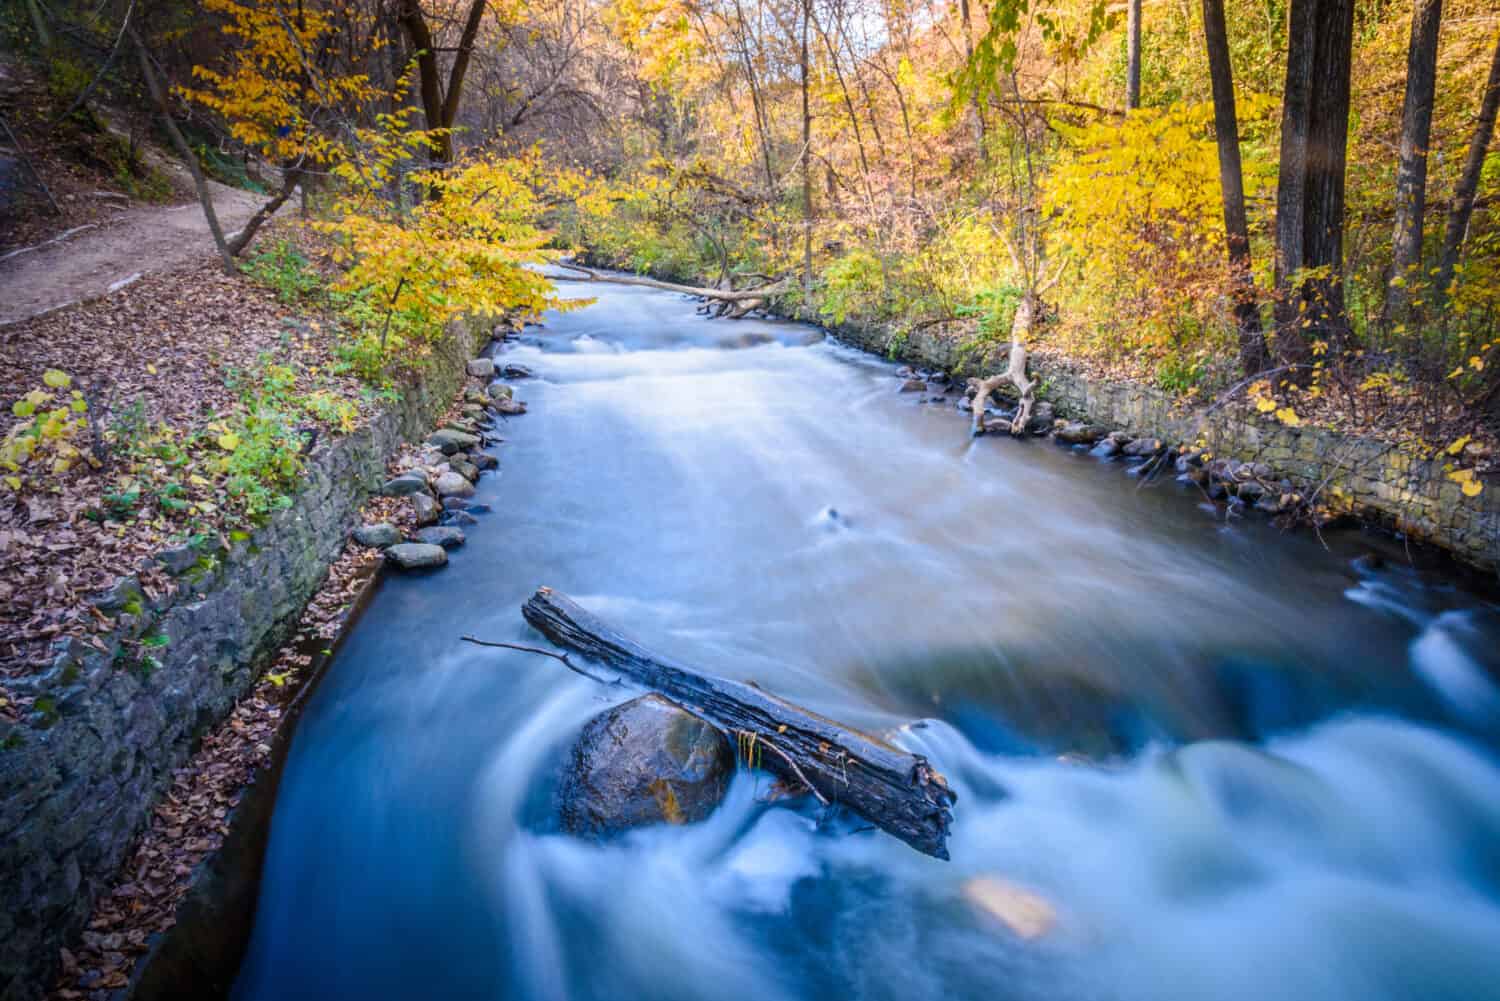 This is the Minnehaha Creek lined with trees and leaves during autumn.